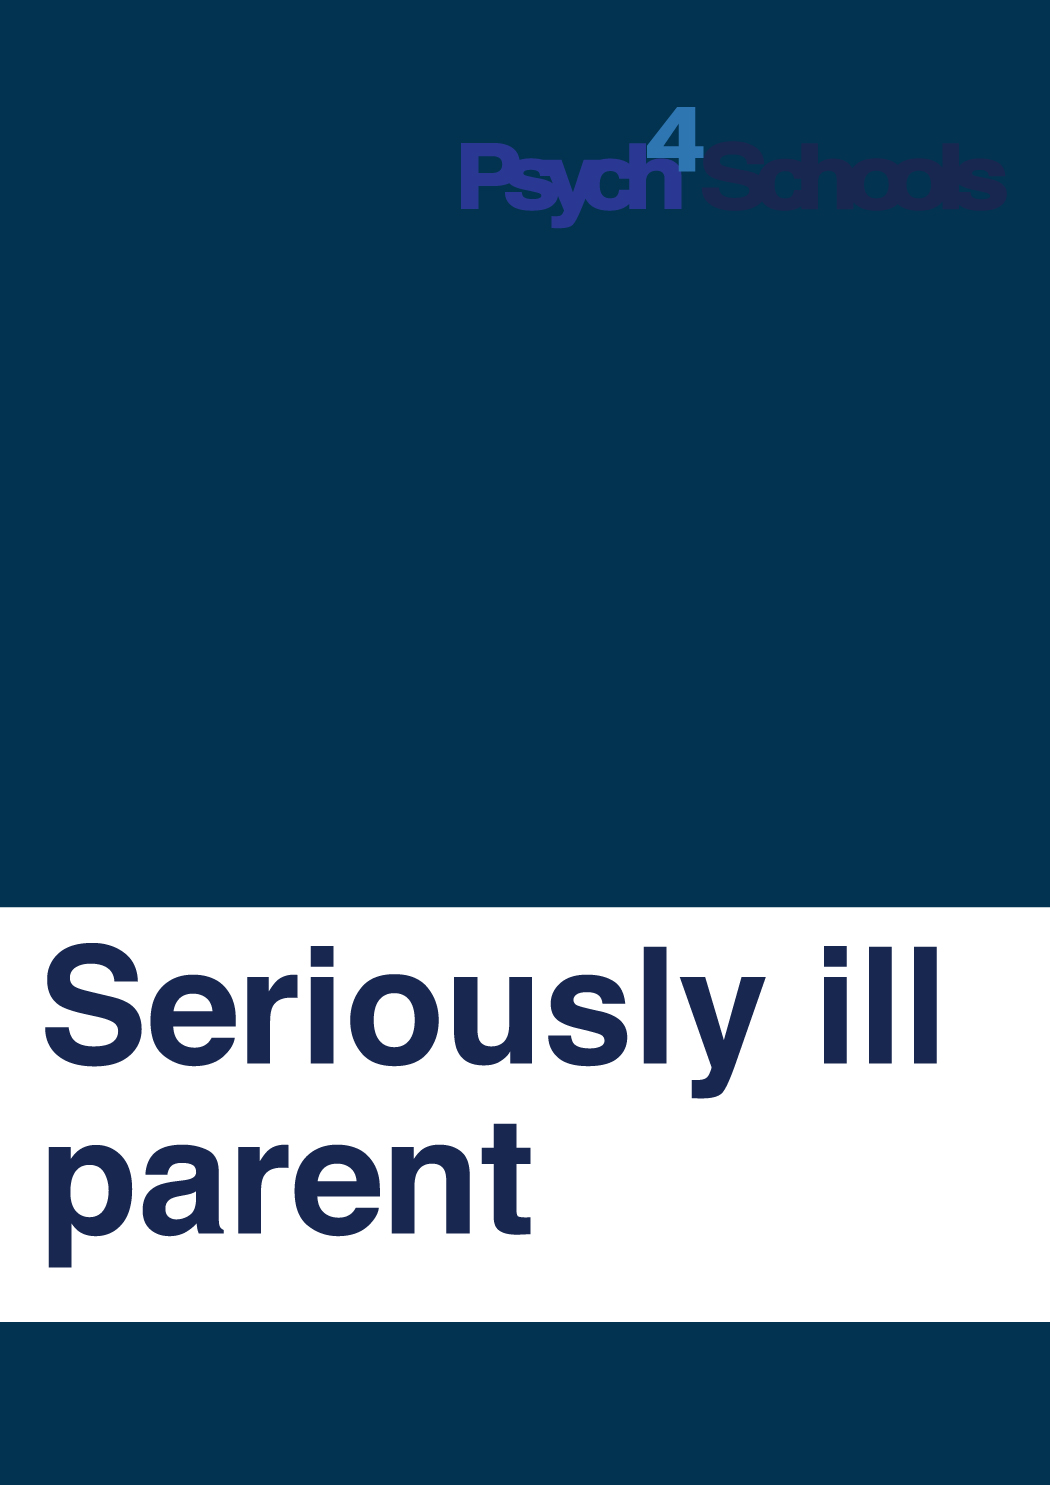 Seriously ill parent